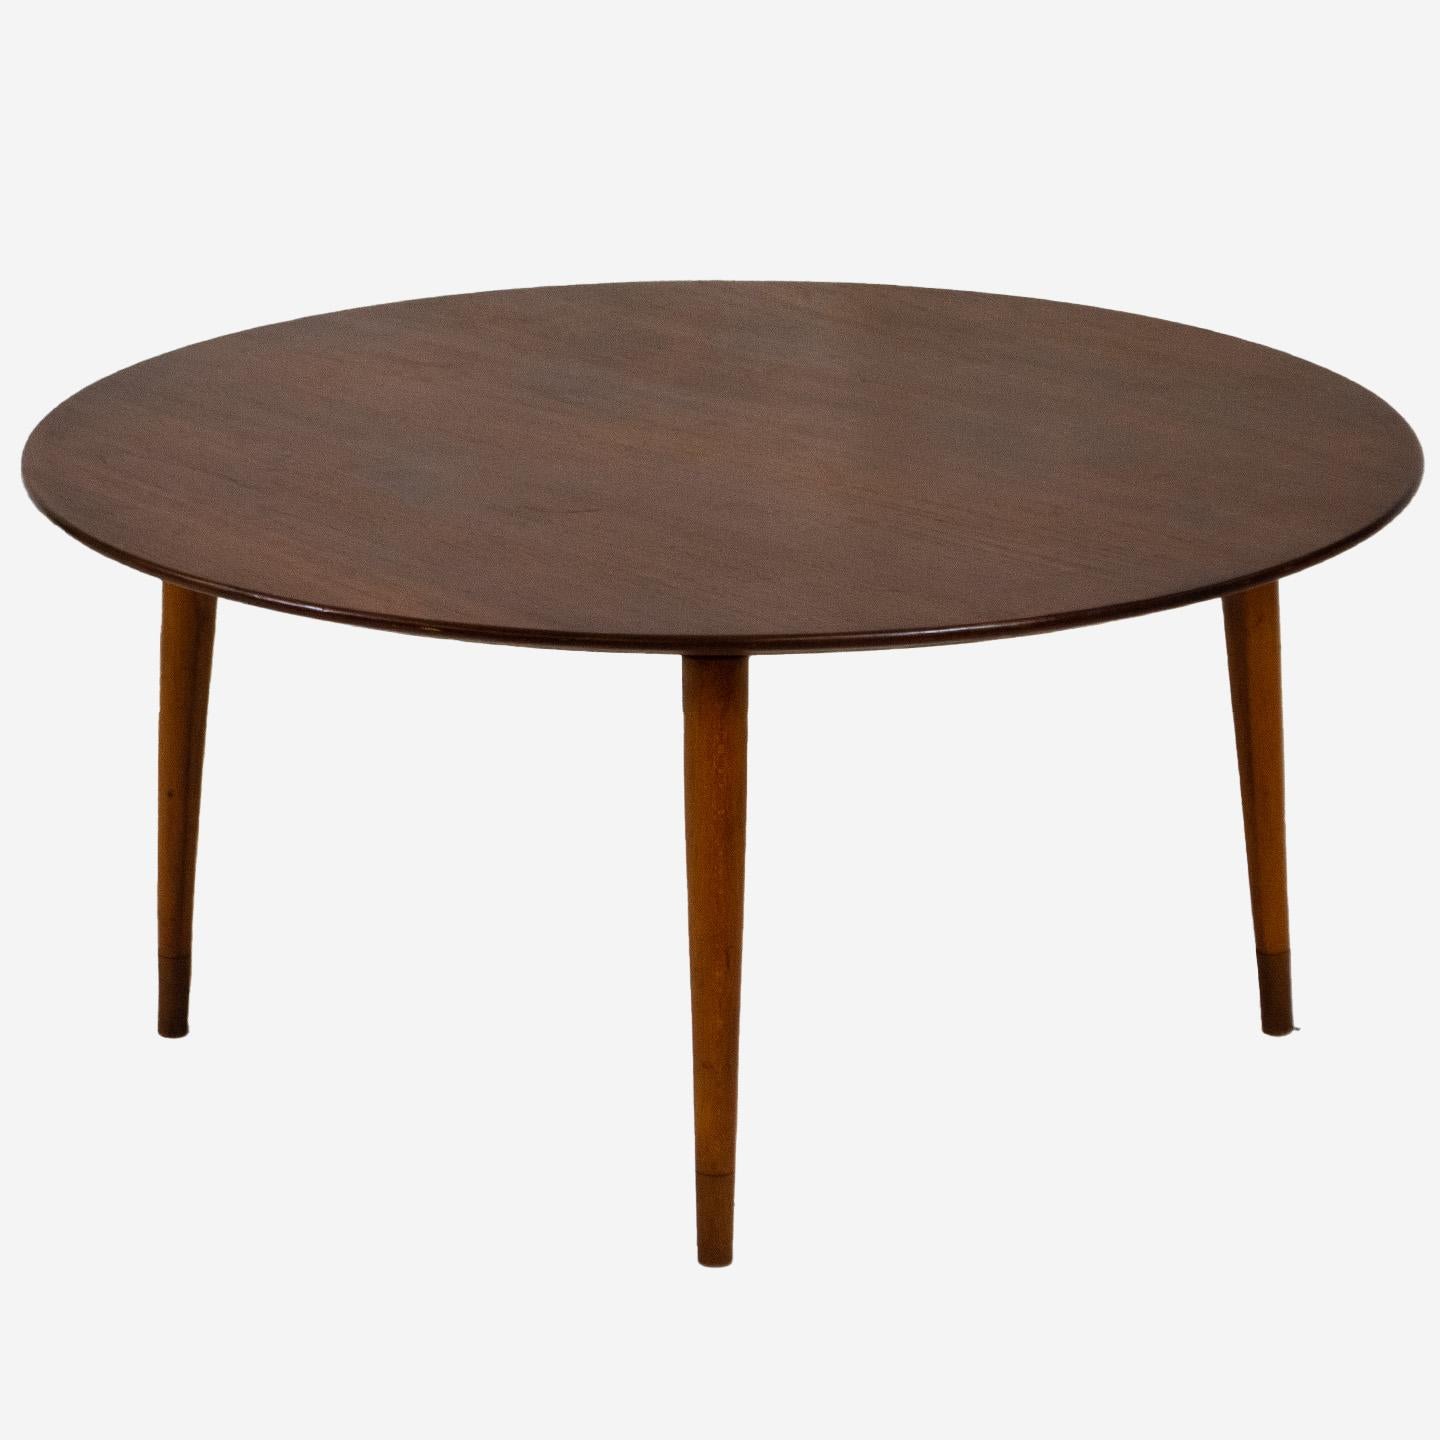 This Mid-Century Modern coffee table is sleek and stylish in design. The teak table top has a beautiful wood grain and constructed with elegant, slender tapered legs. Incredibly understated, yet underside reveals lovely curved joinery and details.